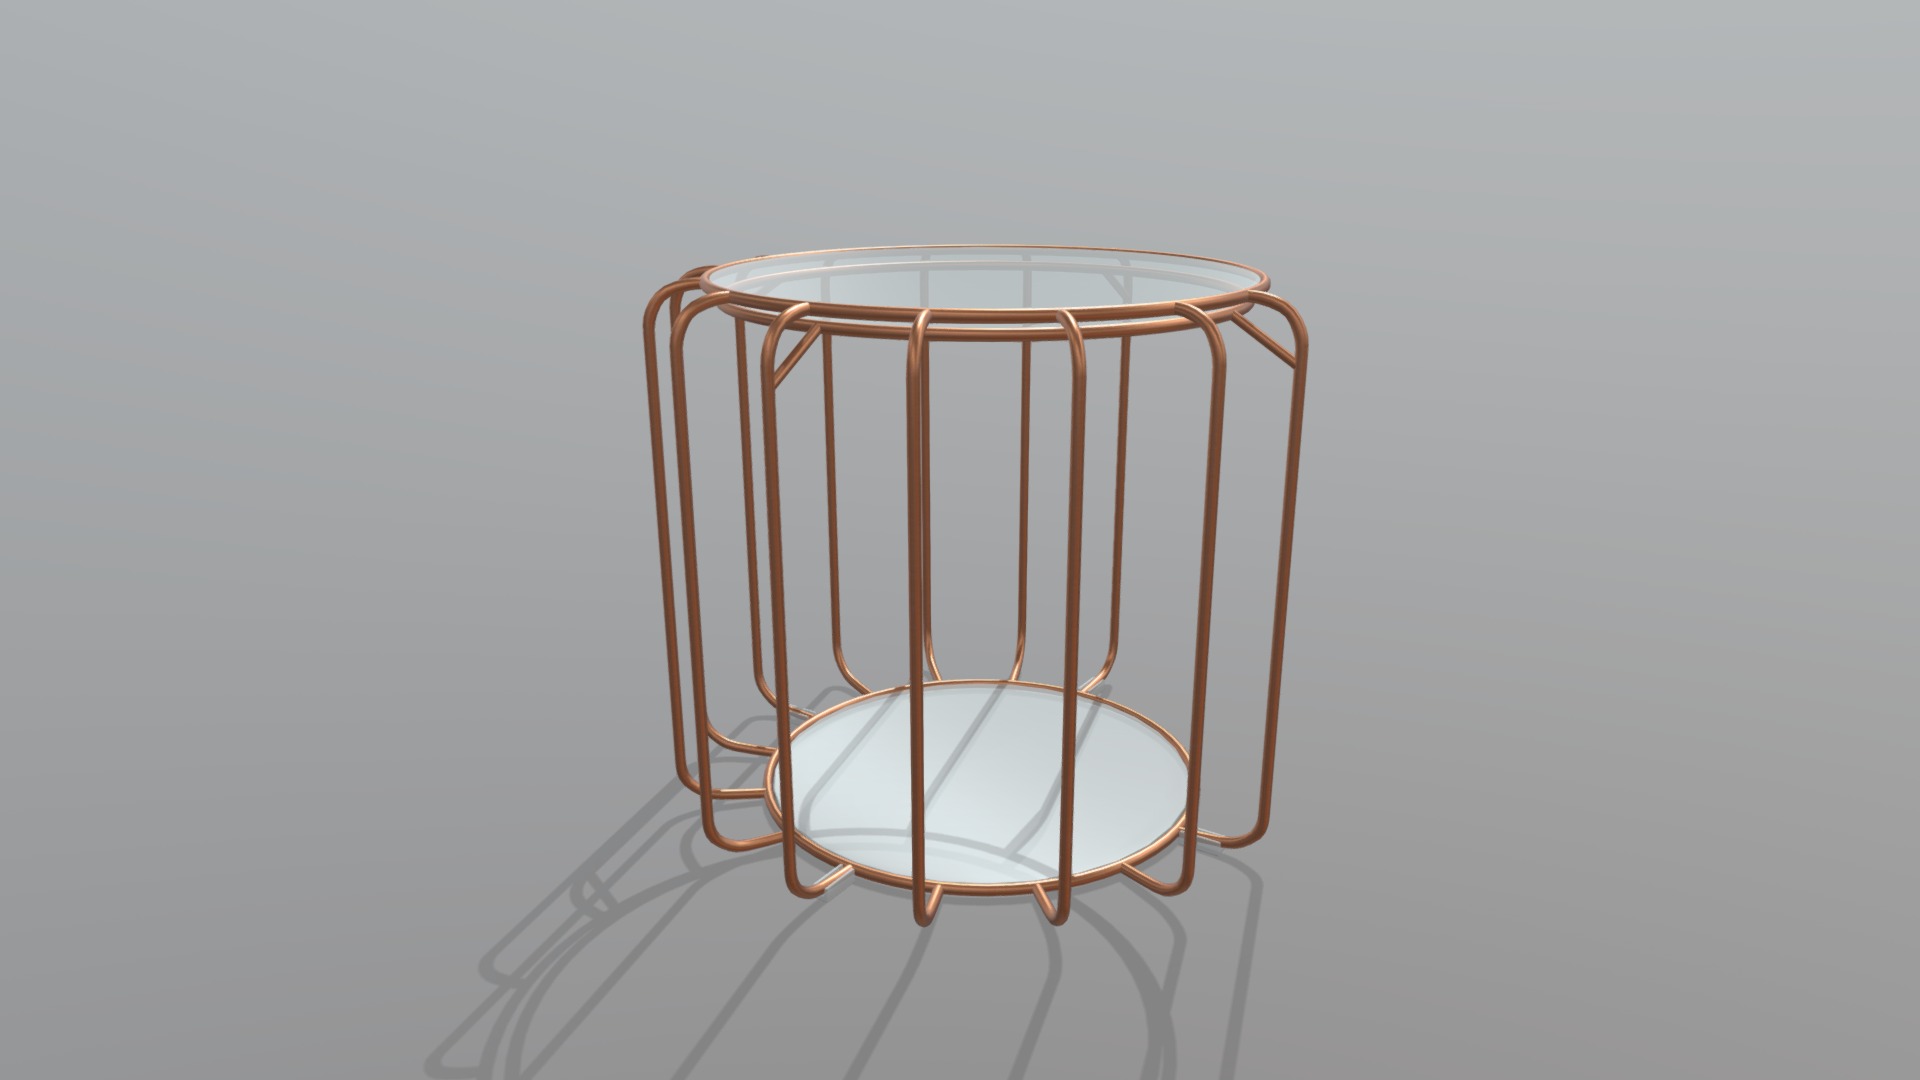 3D model Brass circle table - This is a 3D model of the Brass circle table. The 3D model is about a basketball hoop on a white background.